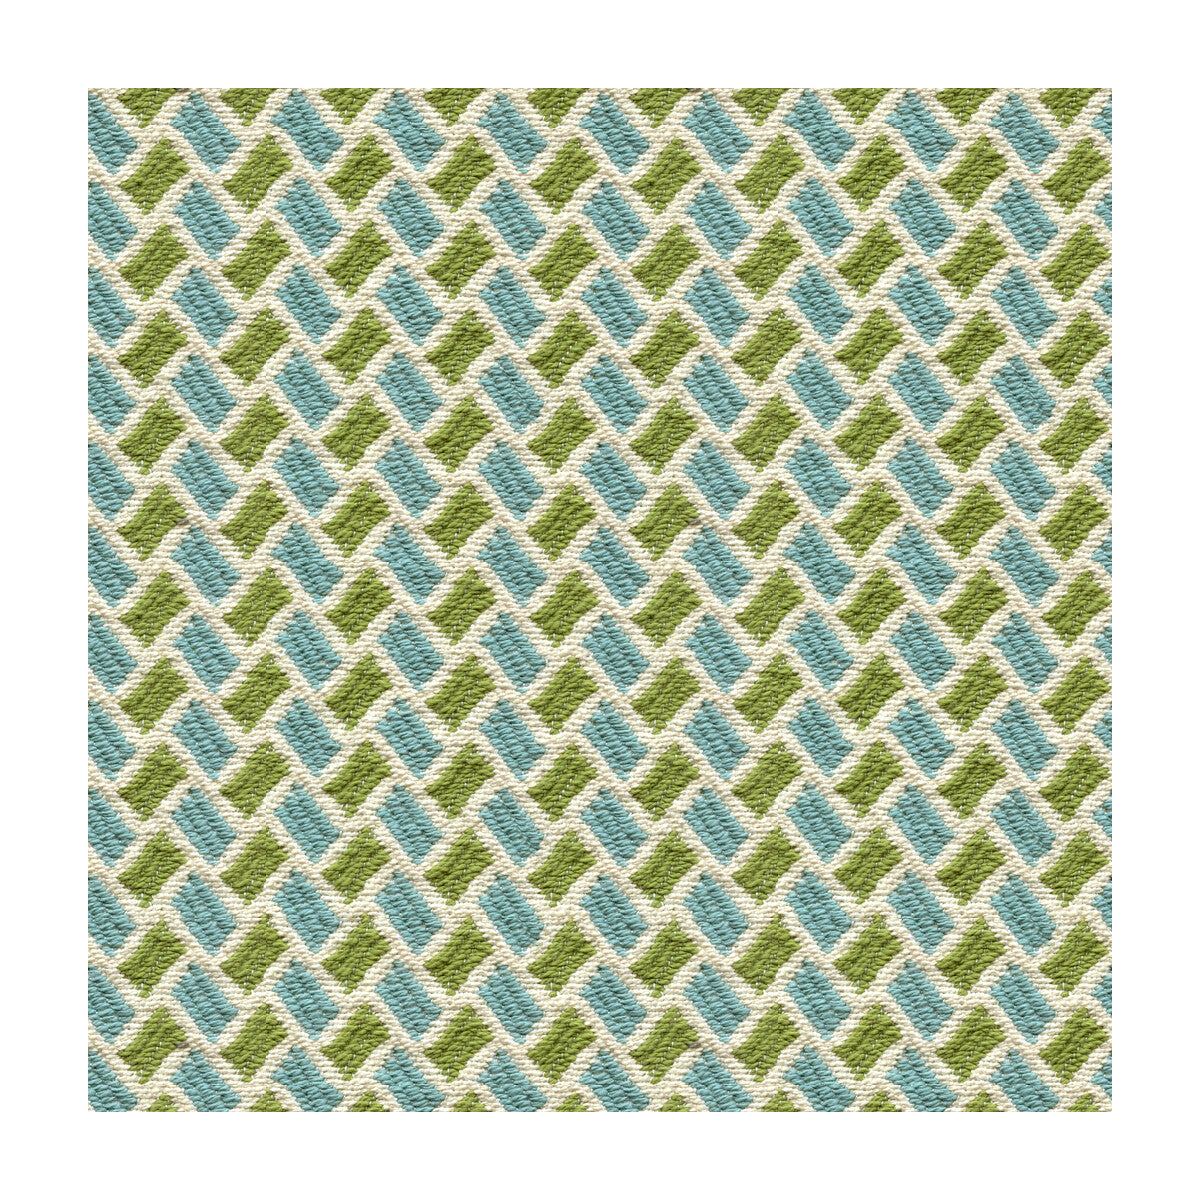 New Briquetage fabric in aqua/lime color - pattern 8015112.513.0 - by Brunschwig &amp; Fils in the Les Tropiques collection